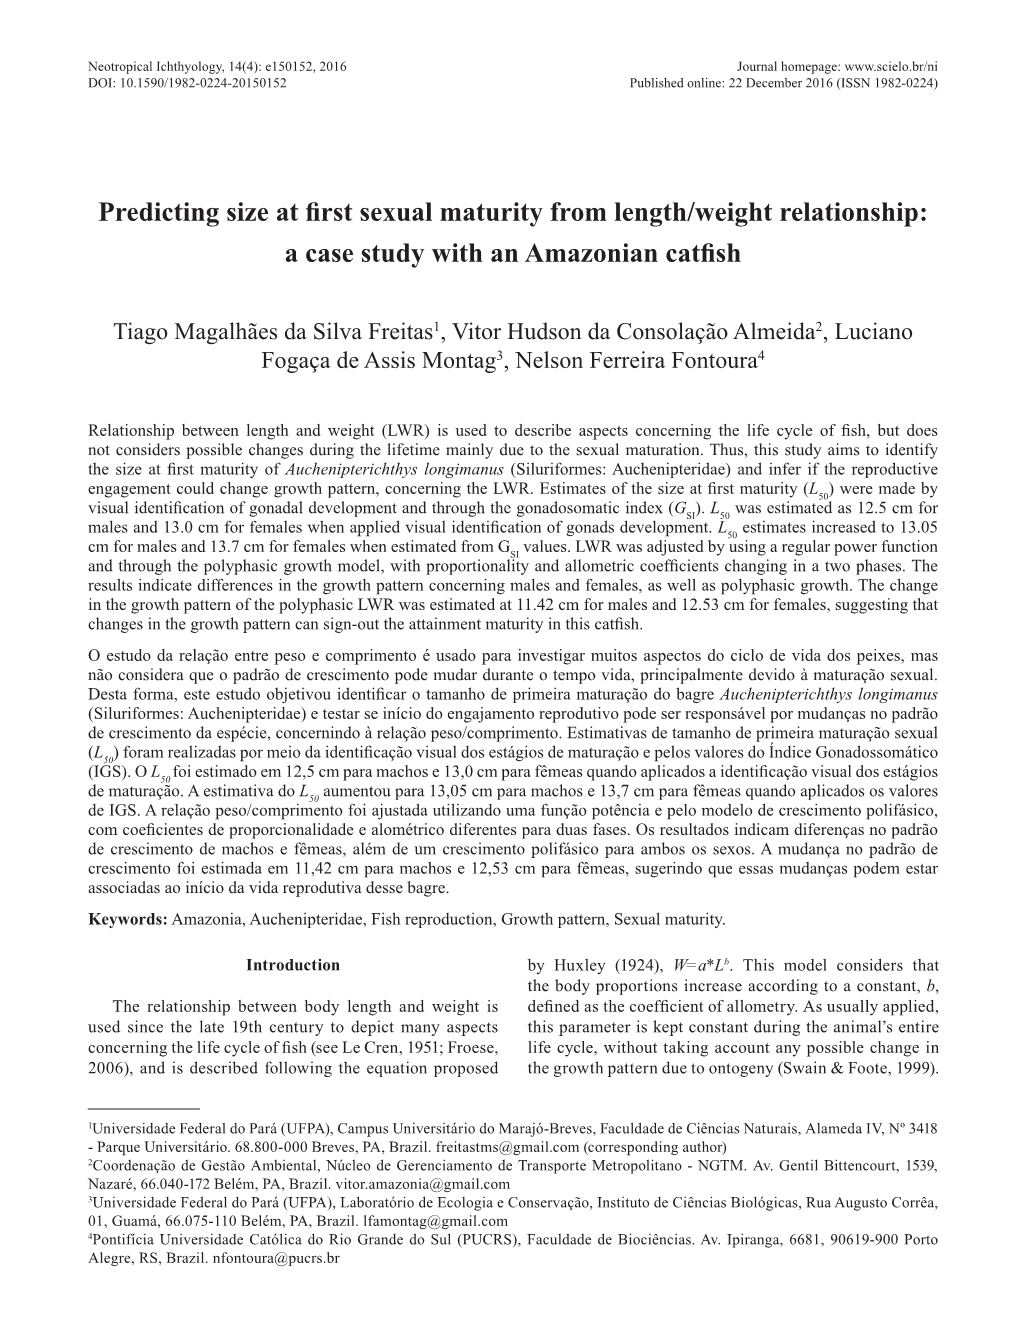 Predicting Size at First Sexual Maturity from Length/Weight Relationship: a Case Study with an Amazonian Catfish